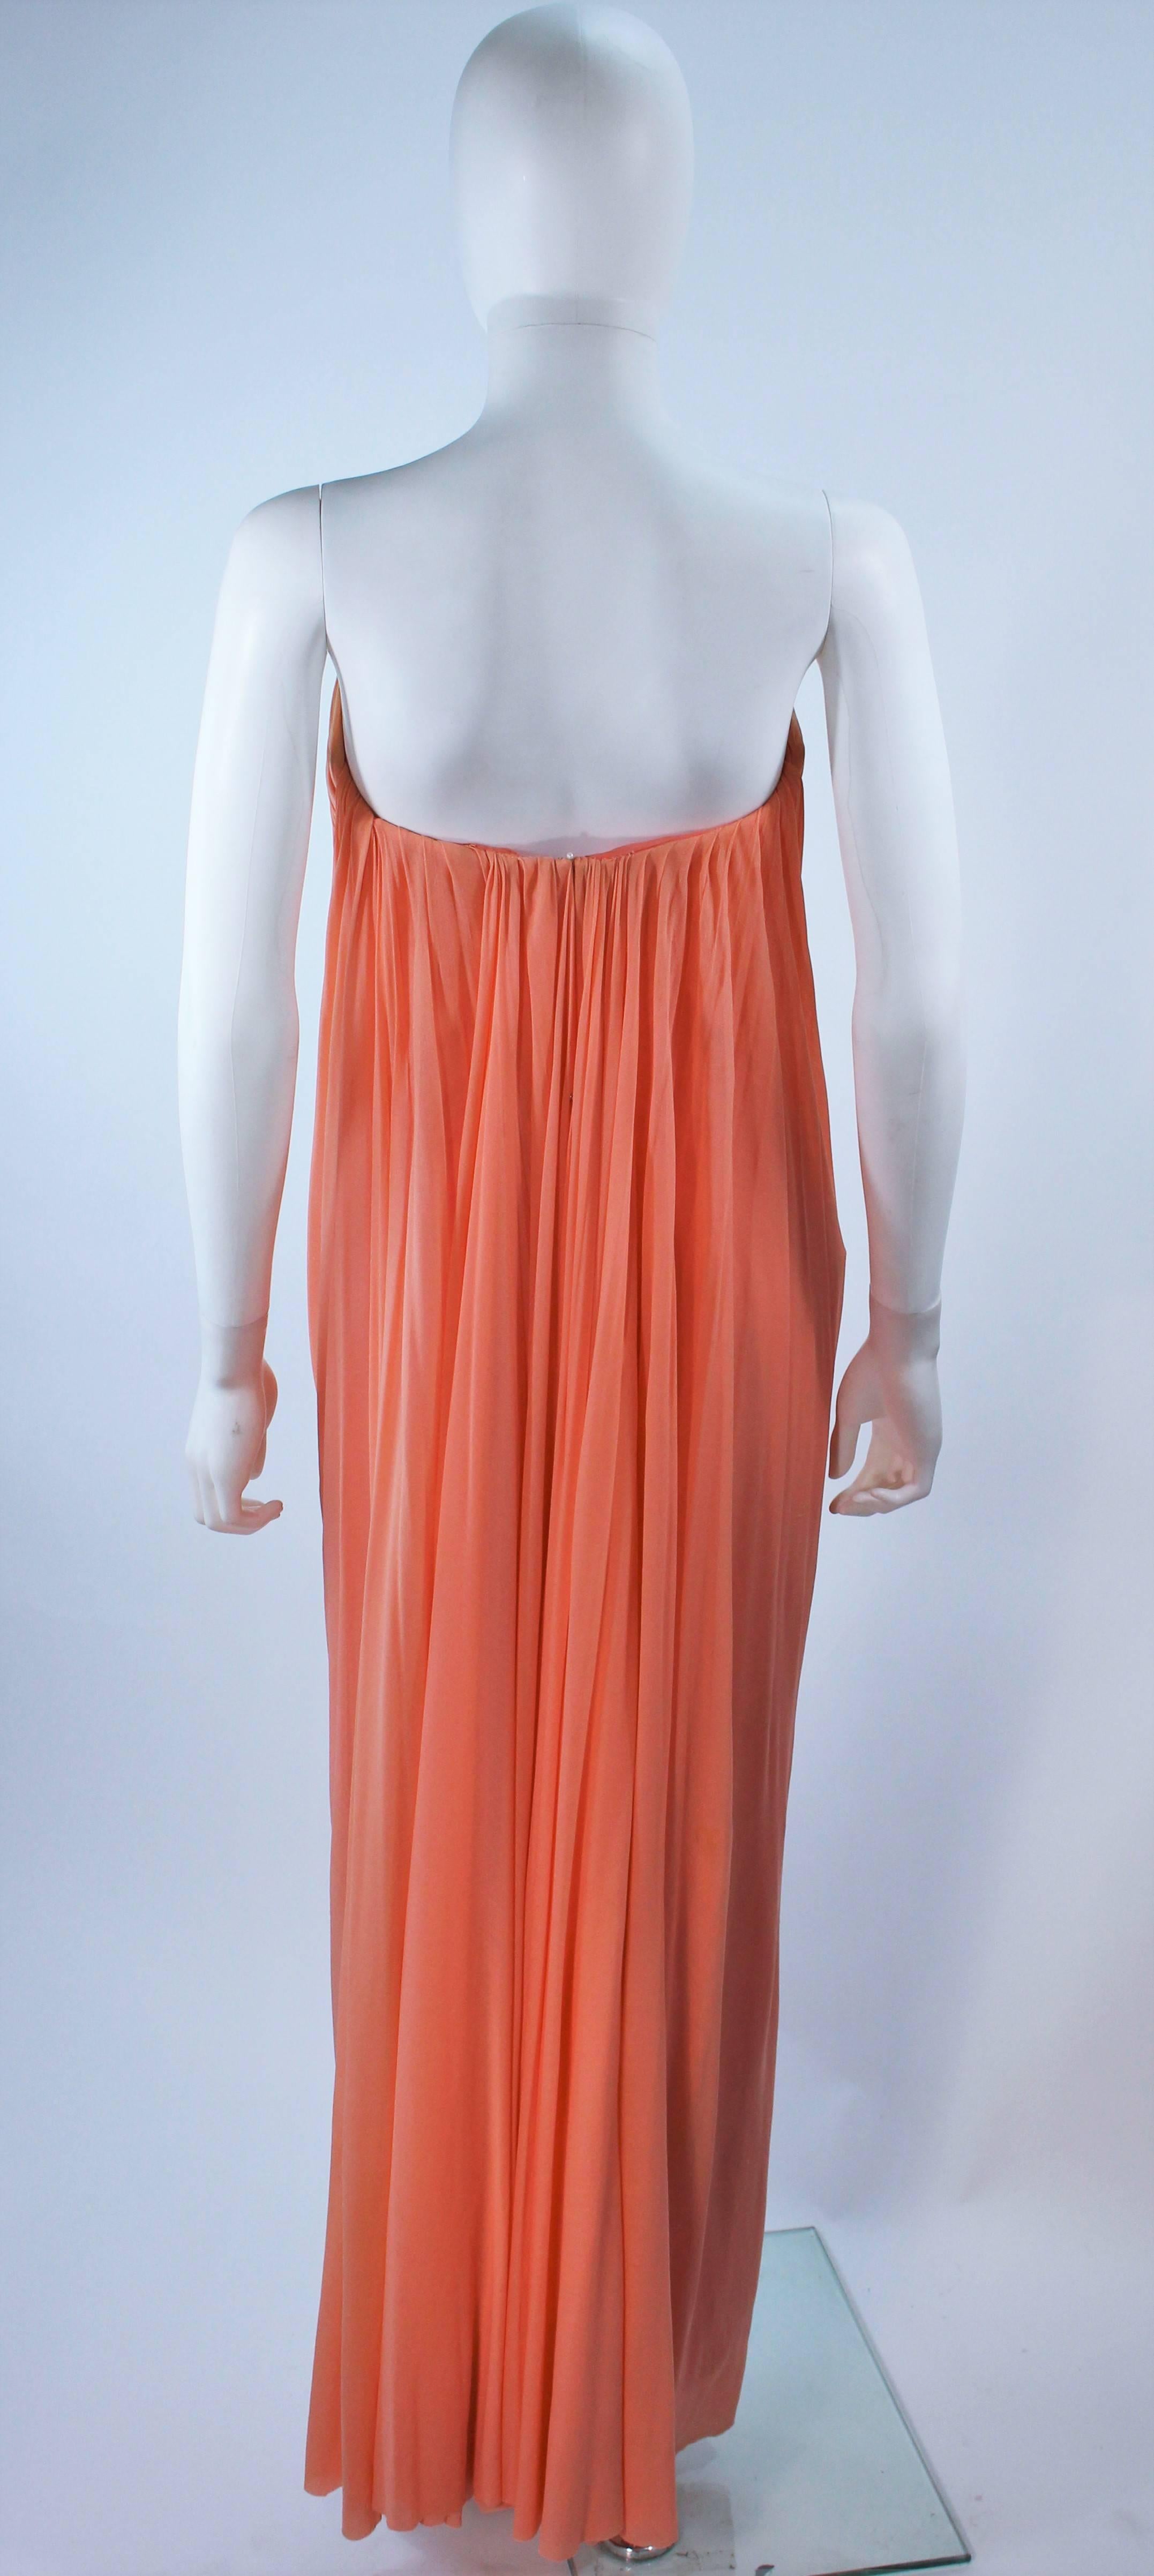 TRAVILLA Peach Strapless Jersey Draped Gown Size 4 For Sale 4